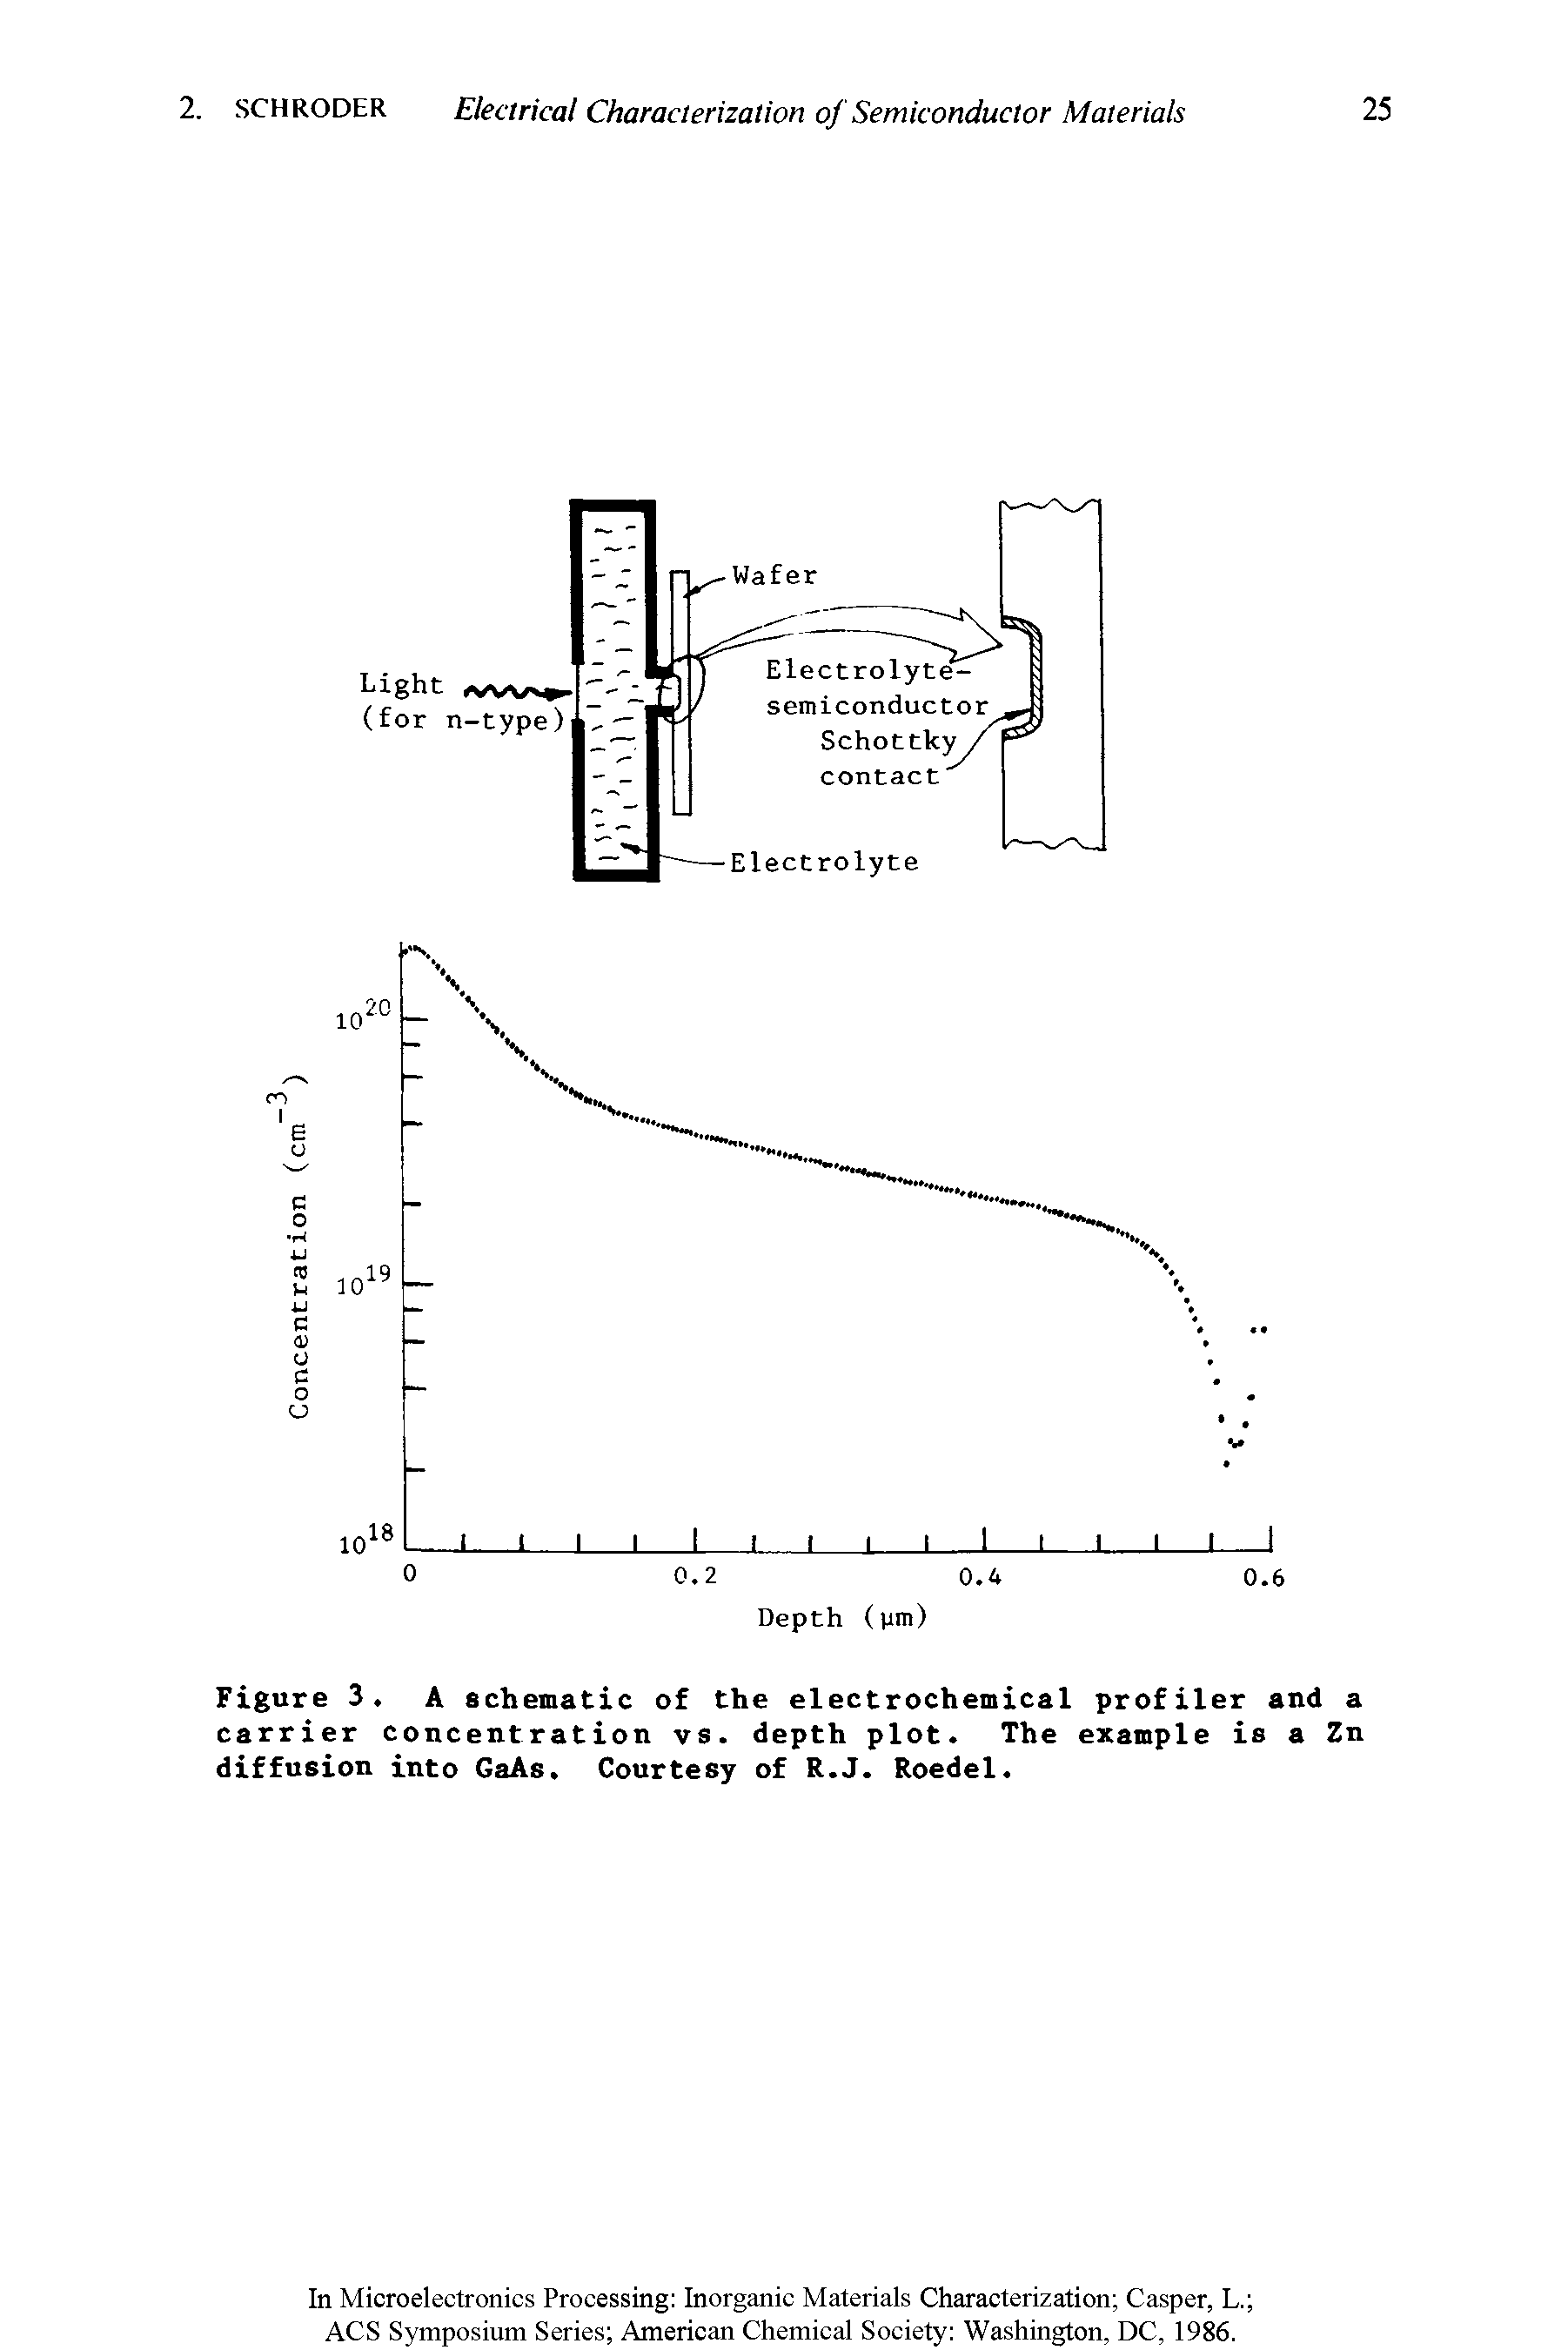 Figure 3. A schematic of the electrochemical profiler and a Carrier concentration vs. depth plot. The example is a Zn diffusion into GaAs. Courtesy of R.J. Roedel.